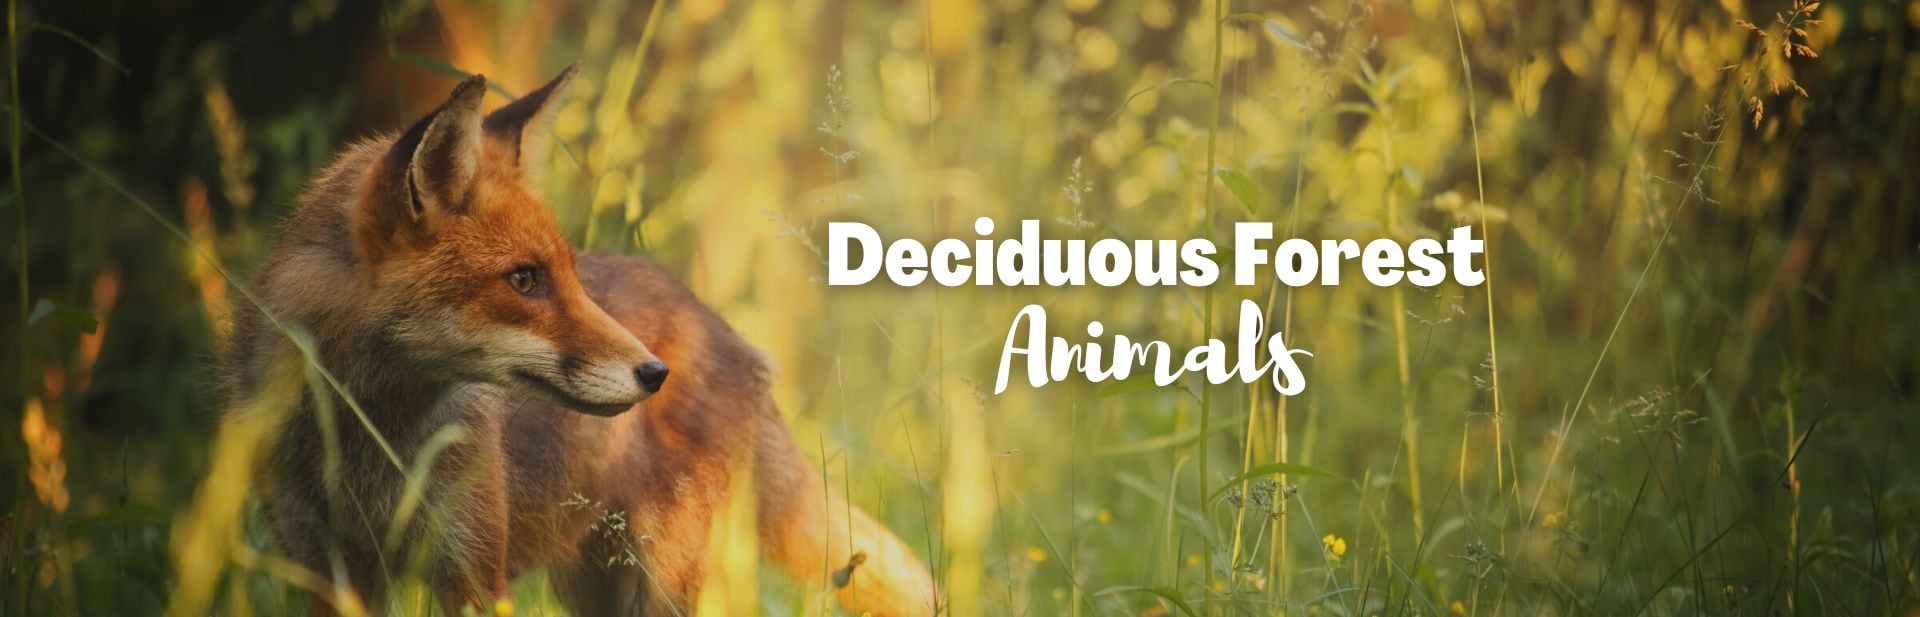 Deciduous Forest Animals: The Diverse Inhabitants of Seasonal Forests